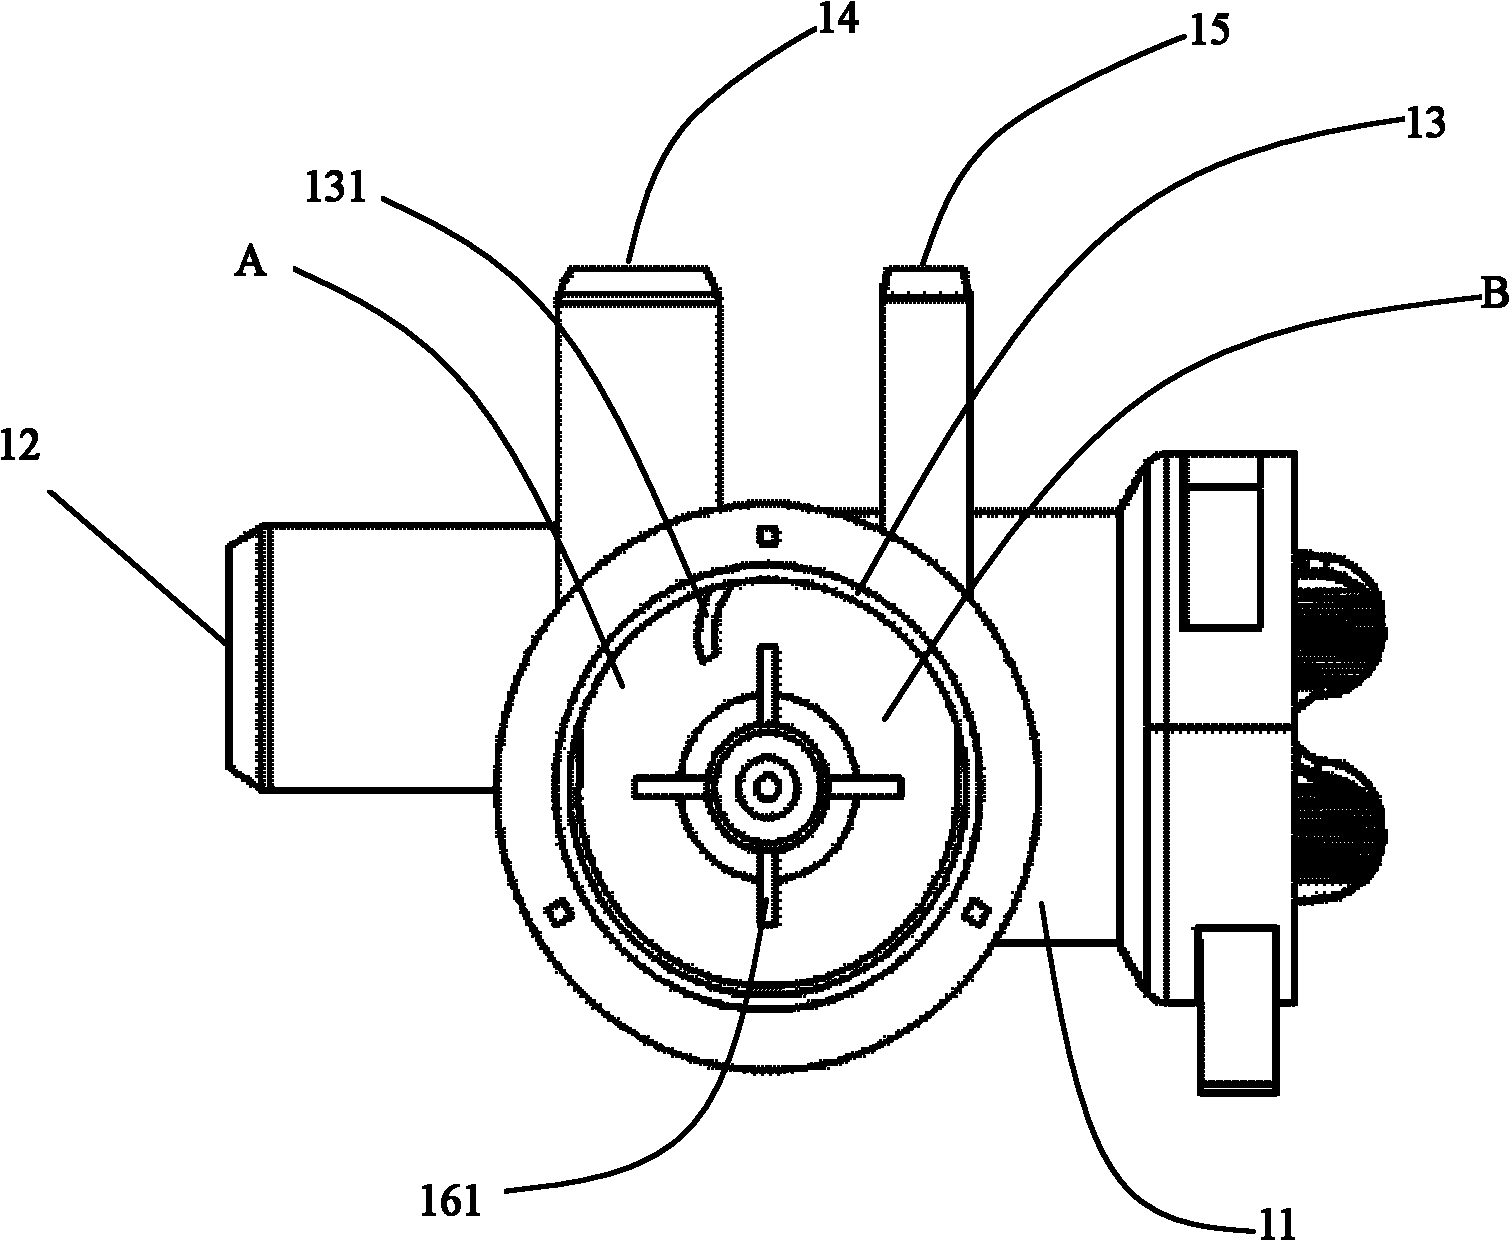 Water pump and washing machine provided with same